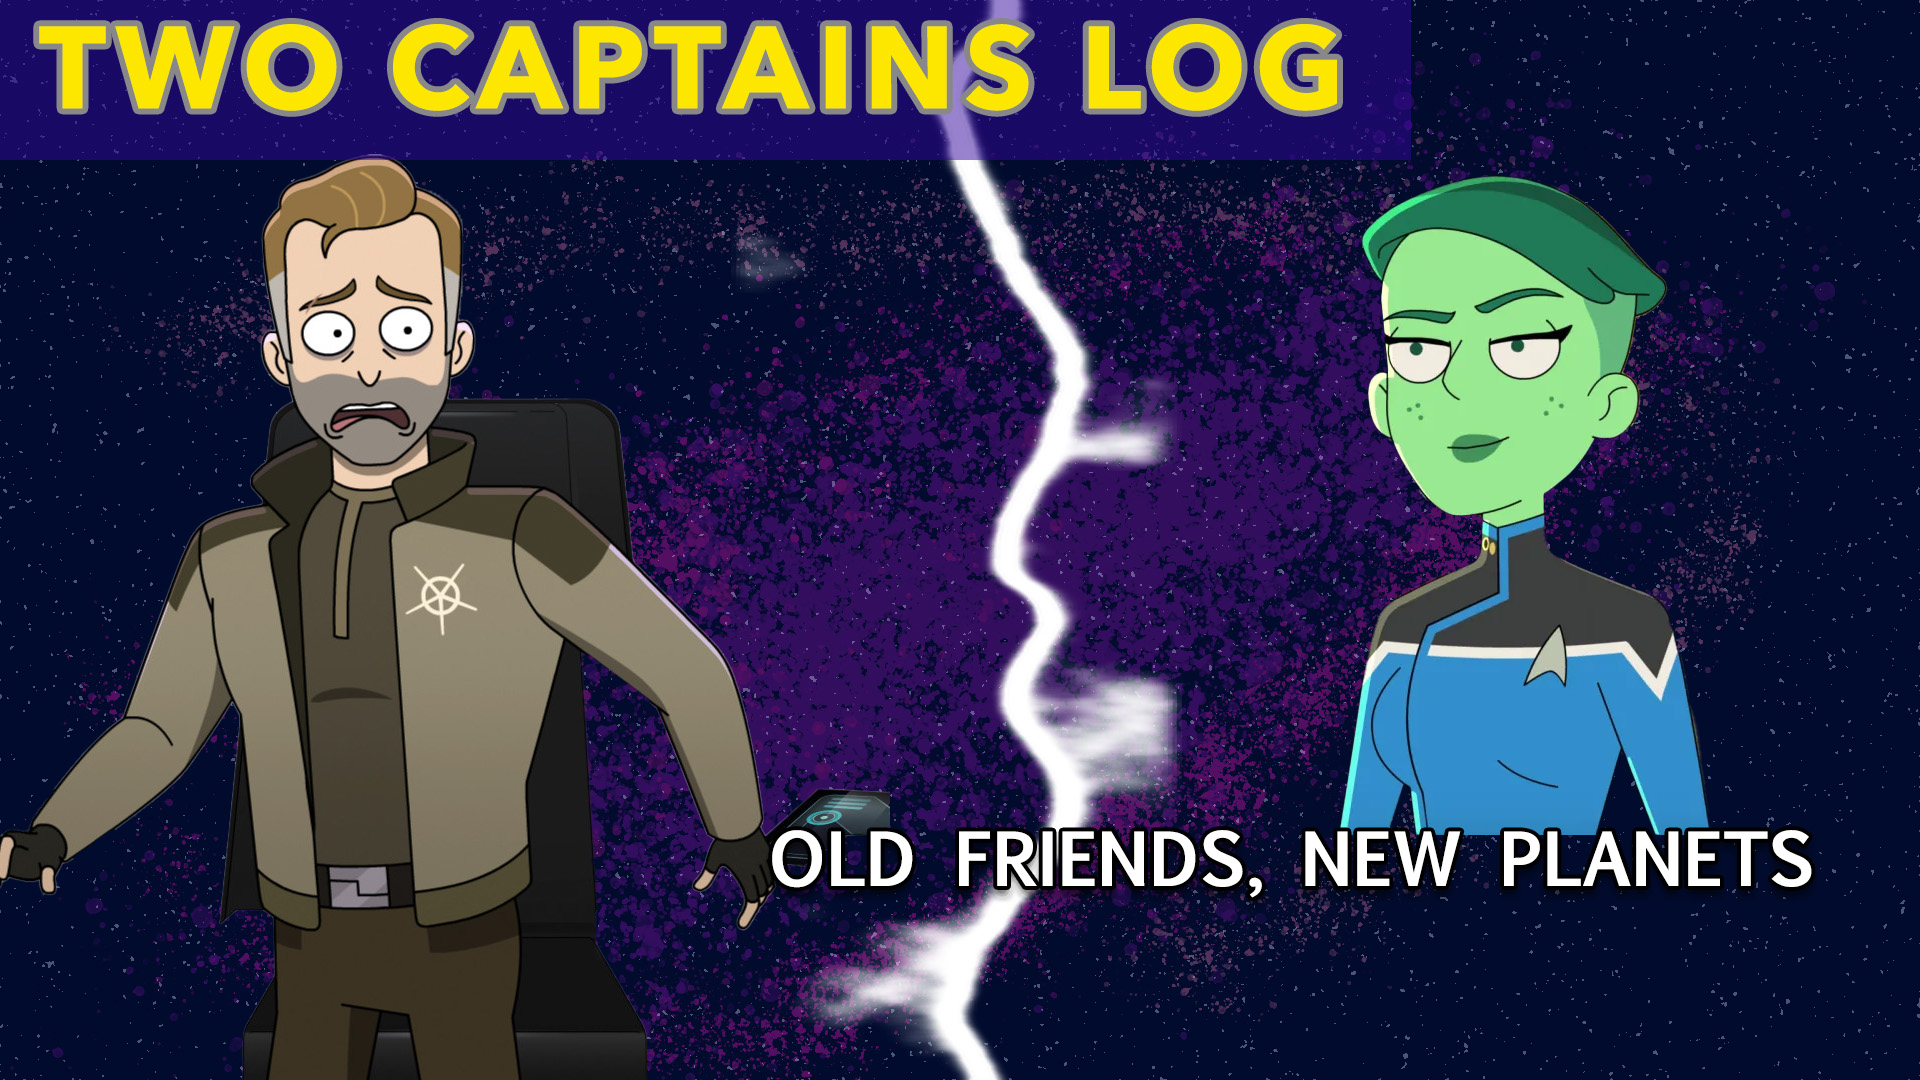 Two Captains Log: “Star Trek: Lower Decks” S4E10 “Old Friends, New Planets” Review